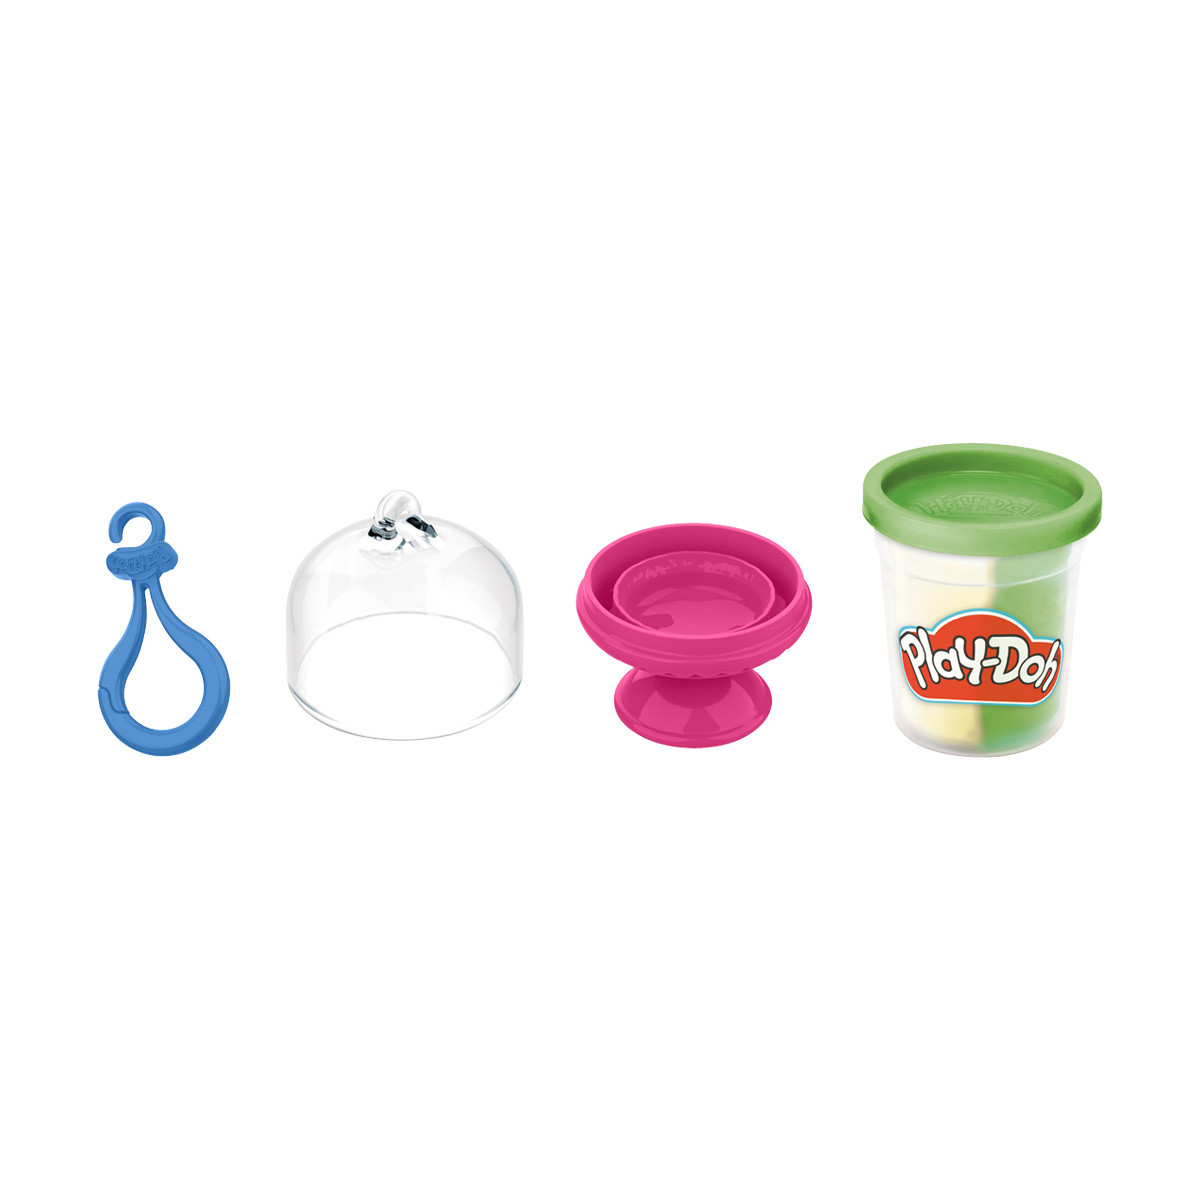 Play-Doh Kitchen Collection Cupcakes and Macarons, 2 oz.